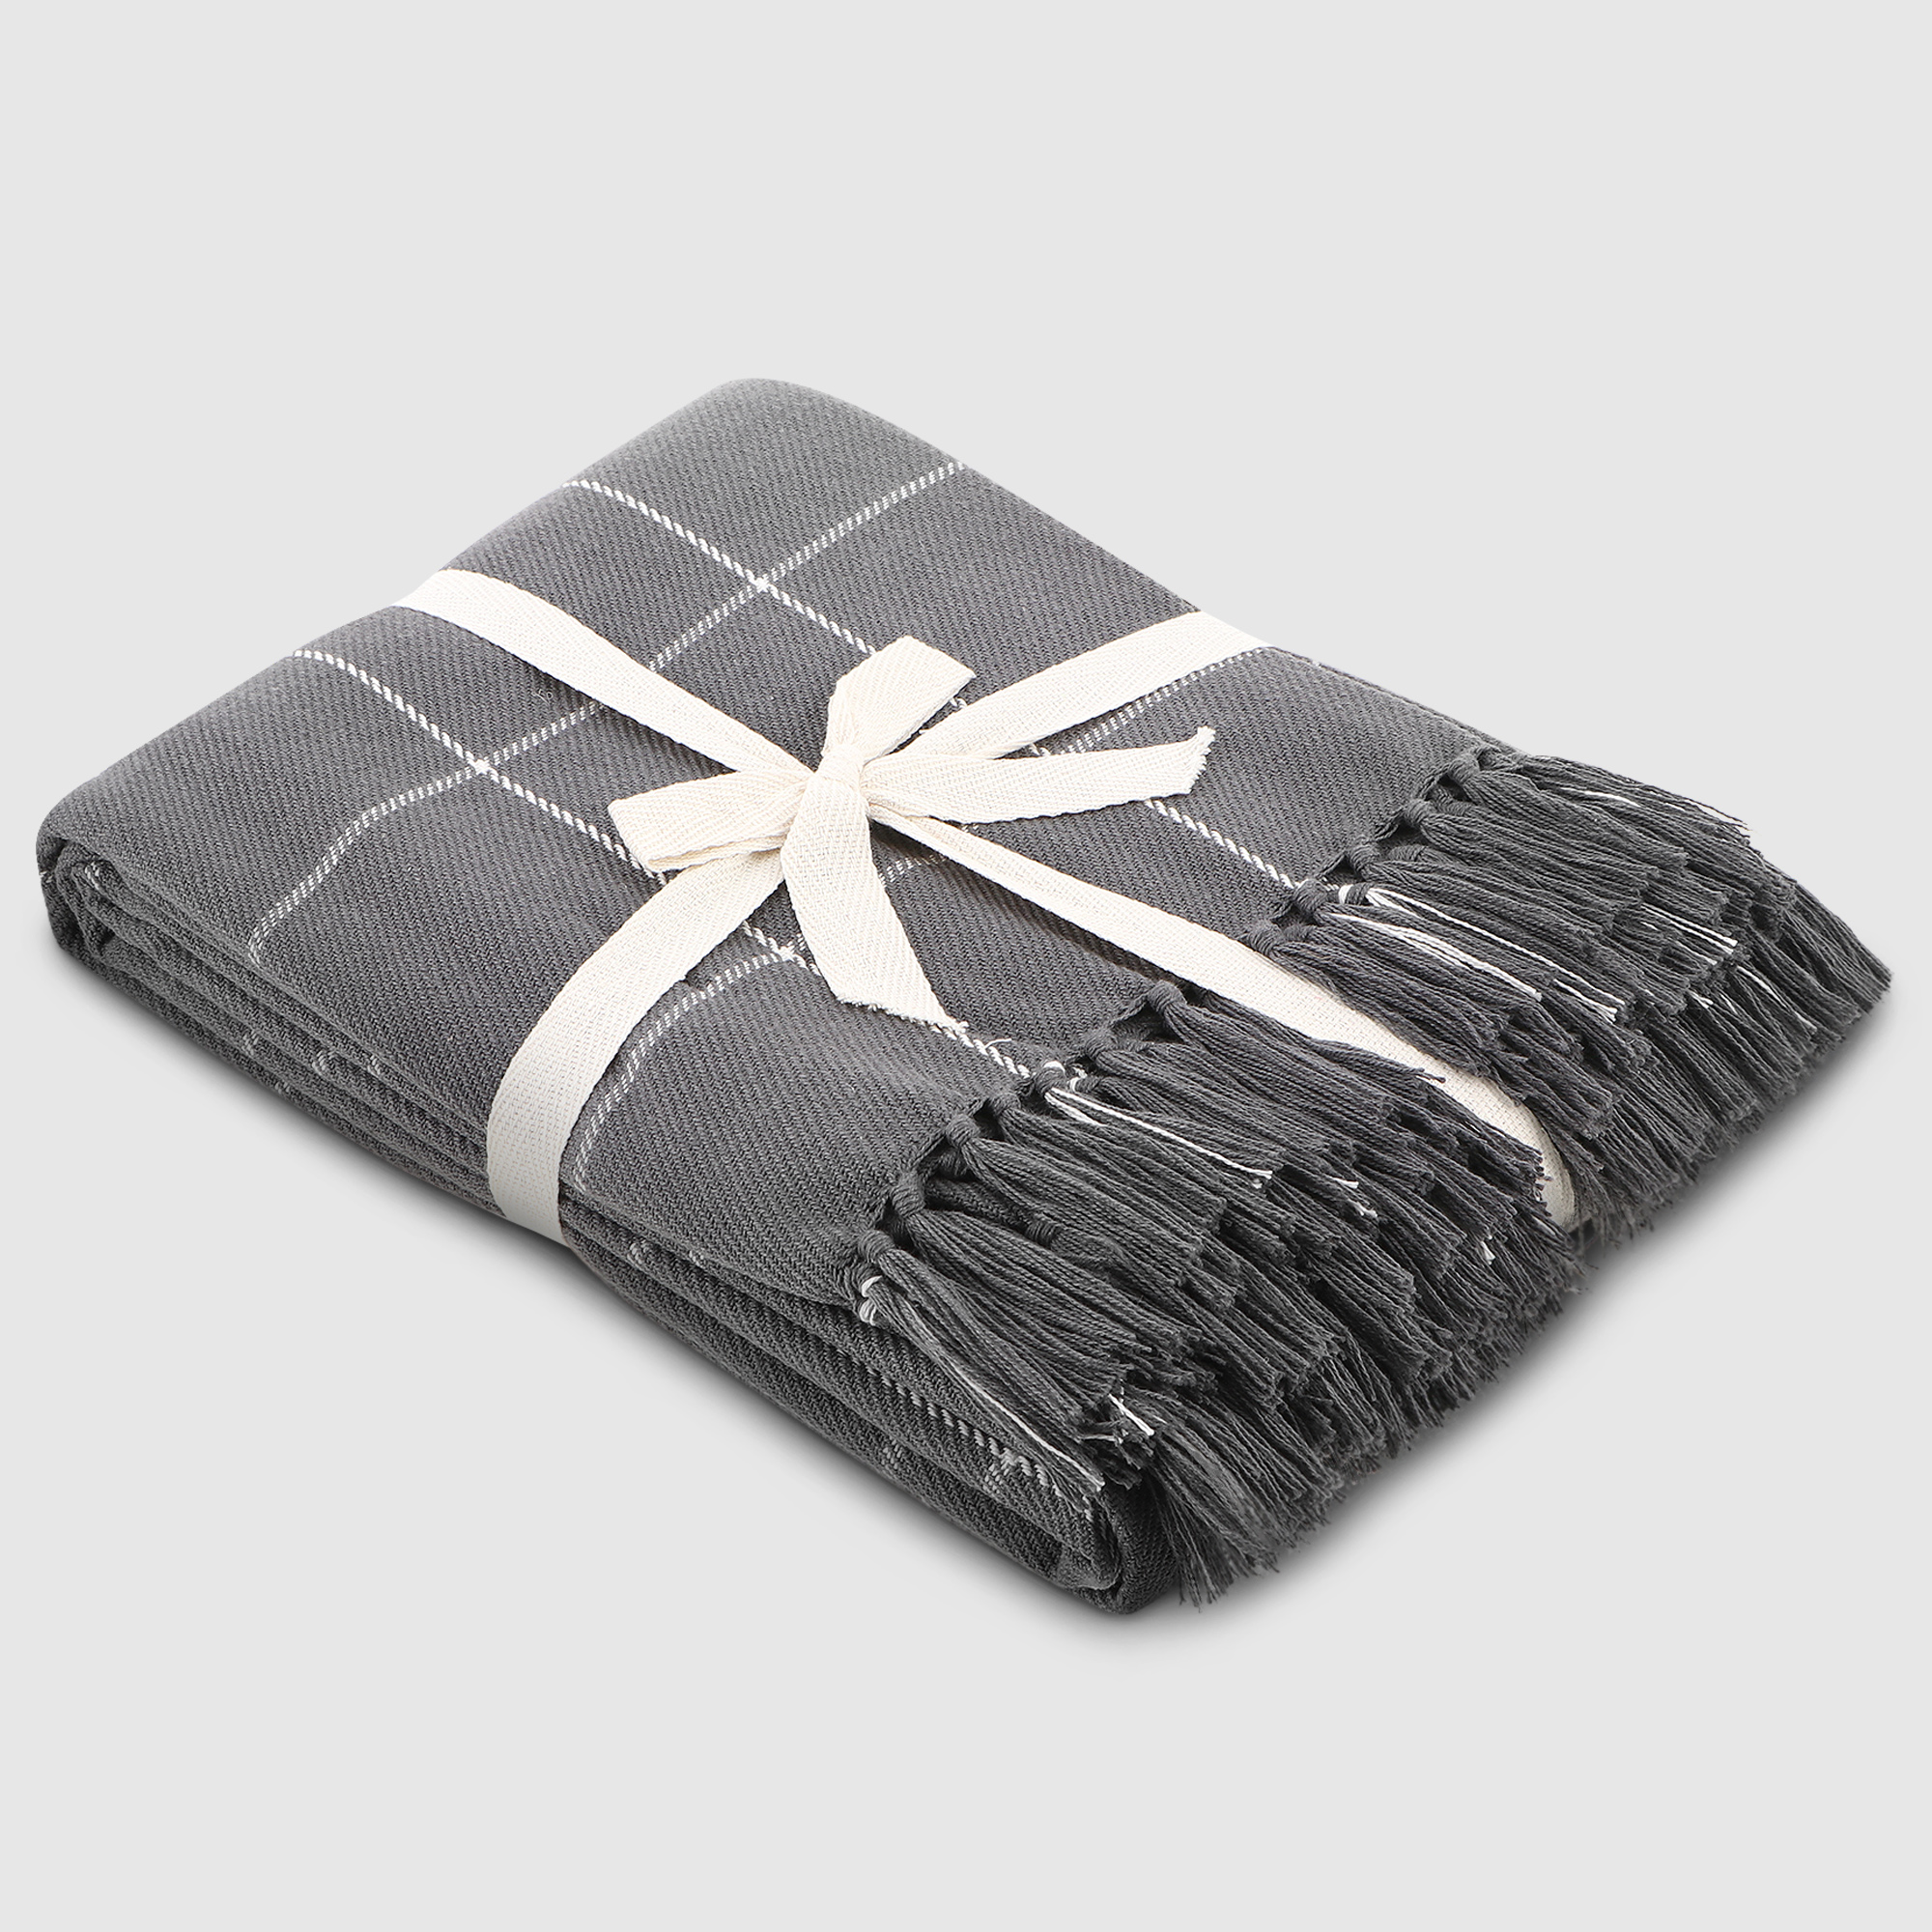 Плед Homelines textiles drill check 140x200cm dark grey cable cashmere heather grey плед